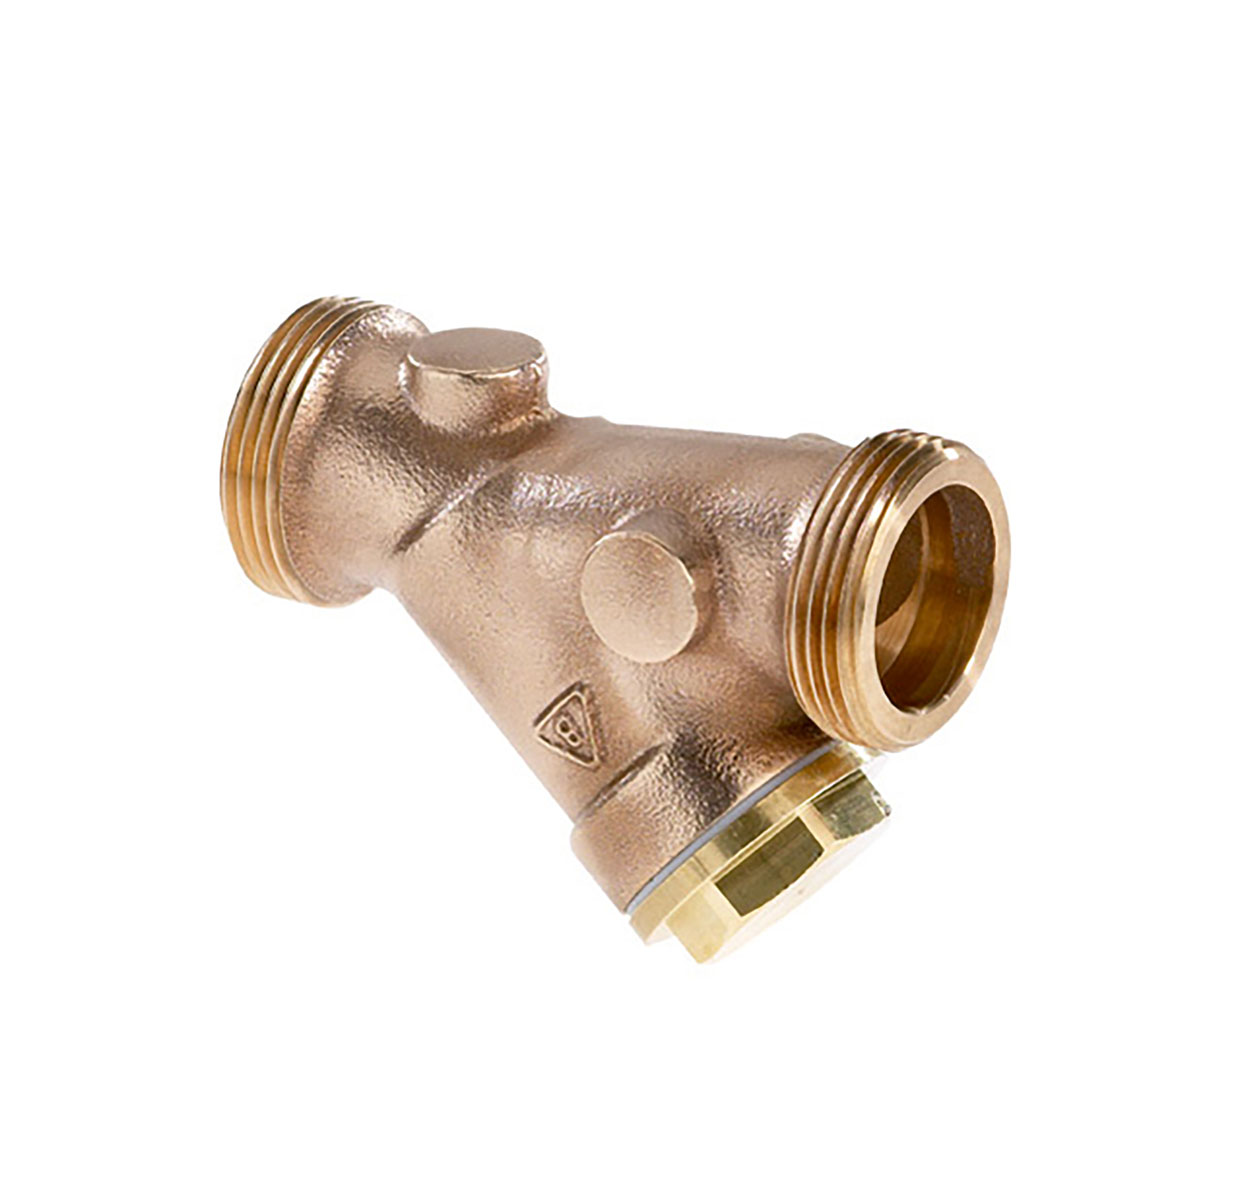 2452150 - Red-brass Strainer Strainer with PTFE-sealing (Teflon)